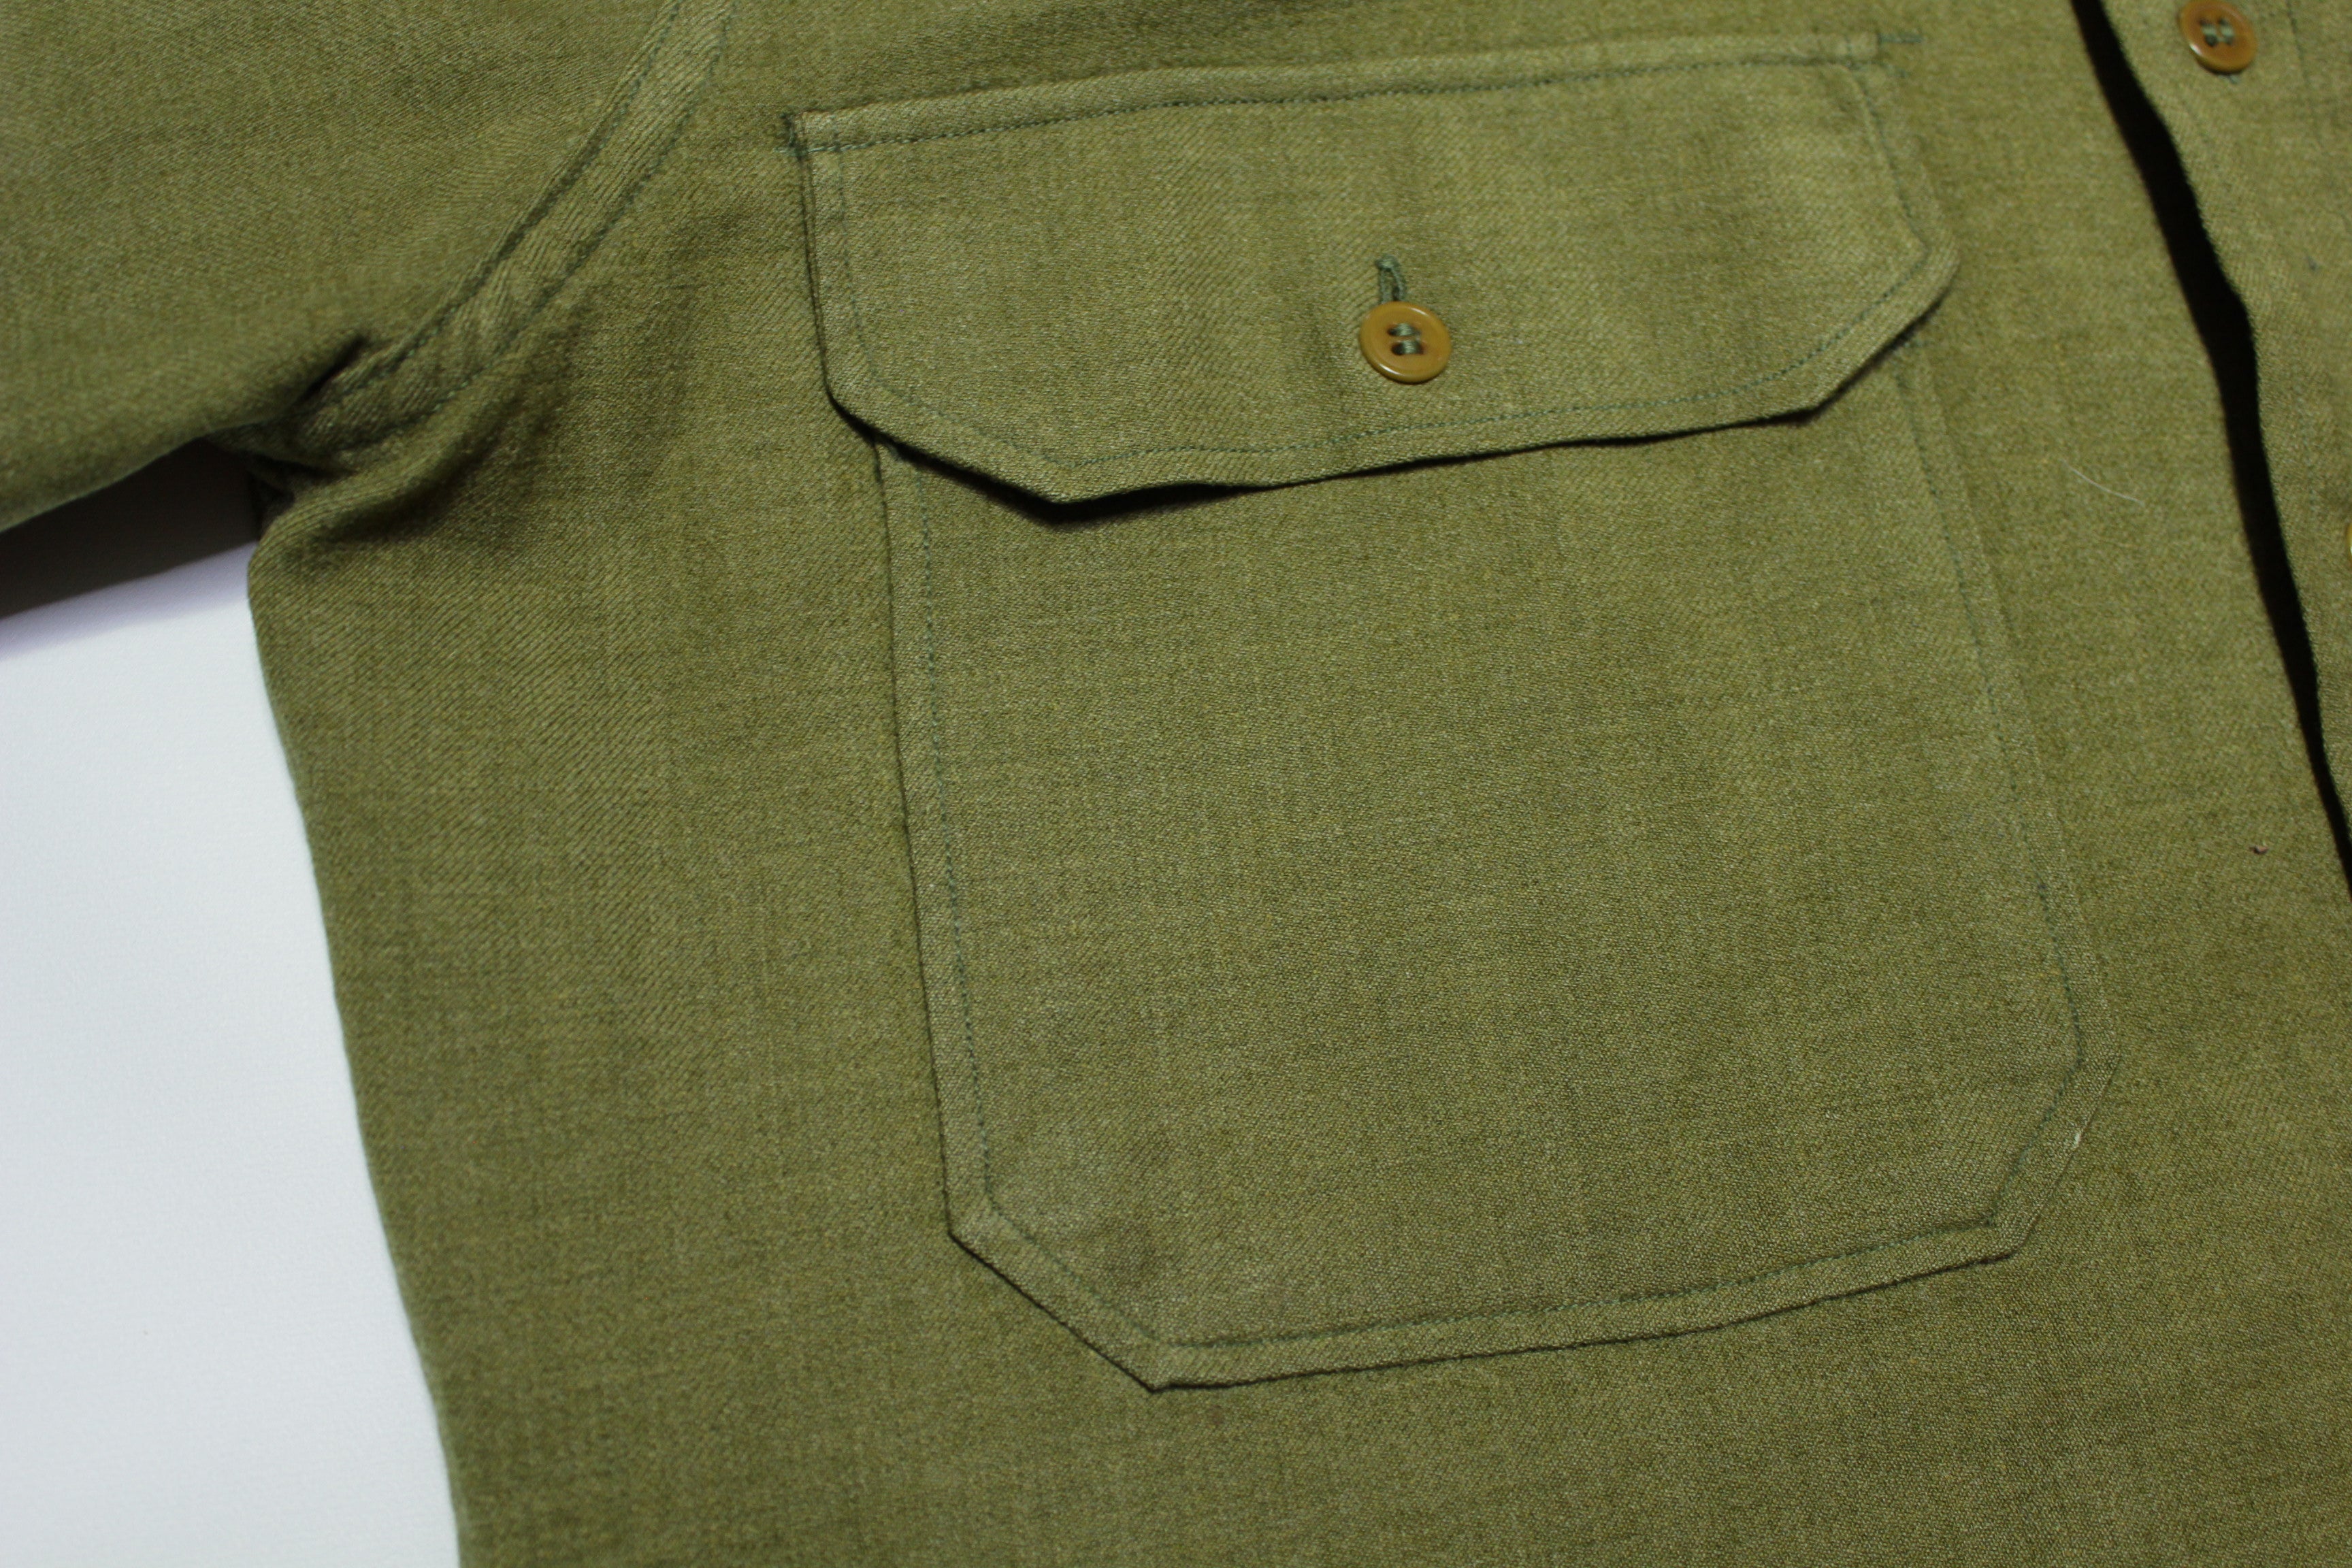 US ARMY WW2 M37 Wool Vintage 1940's Field Service Military Shirt